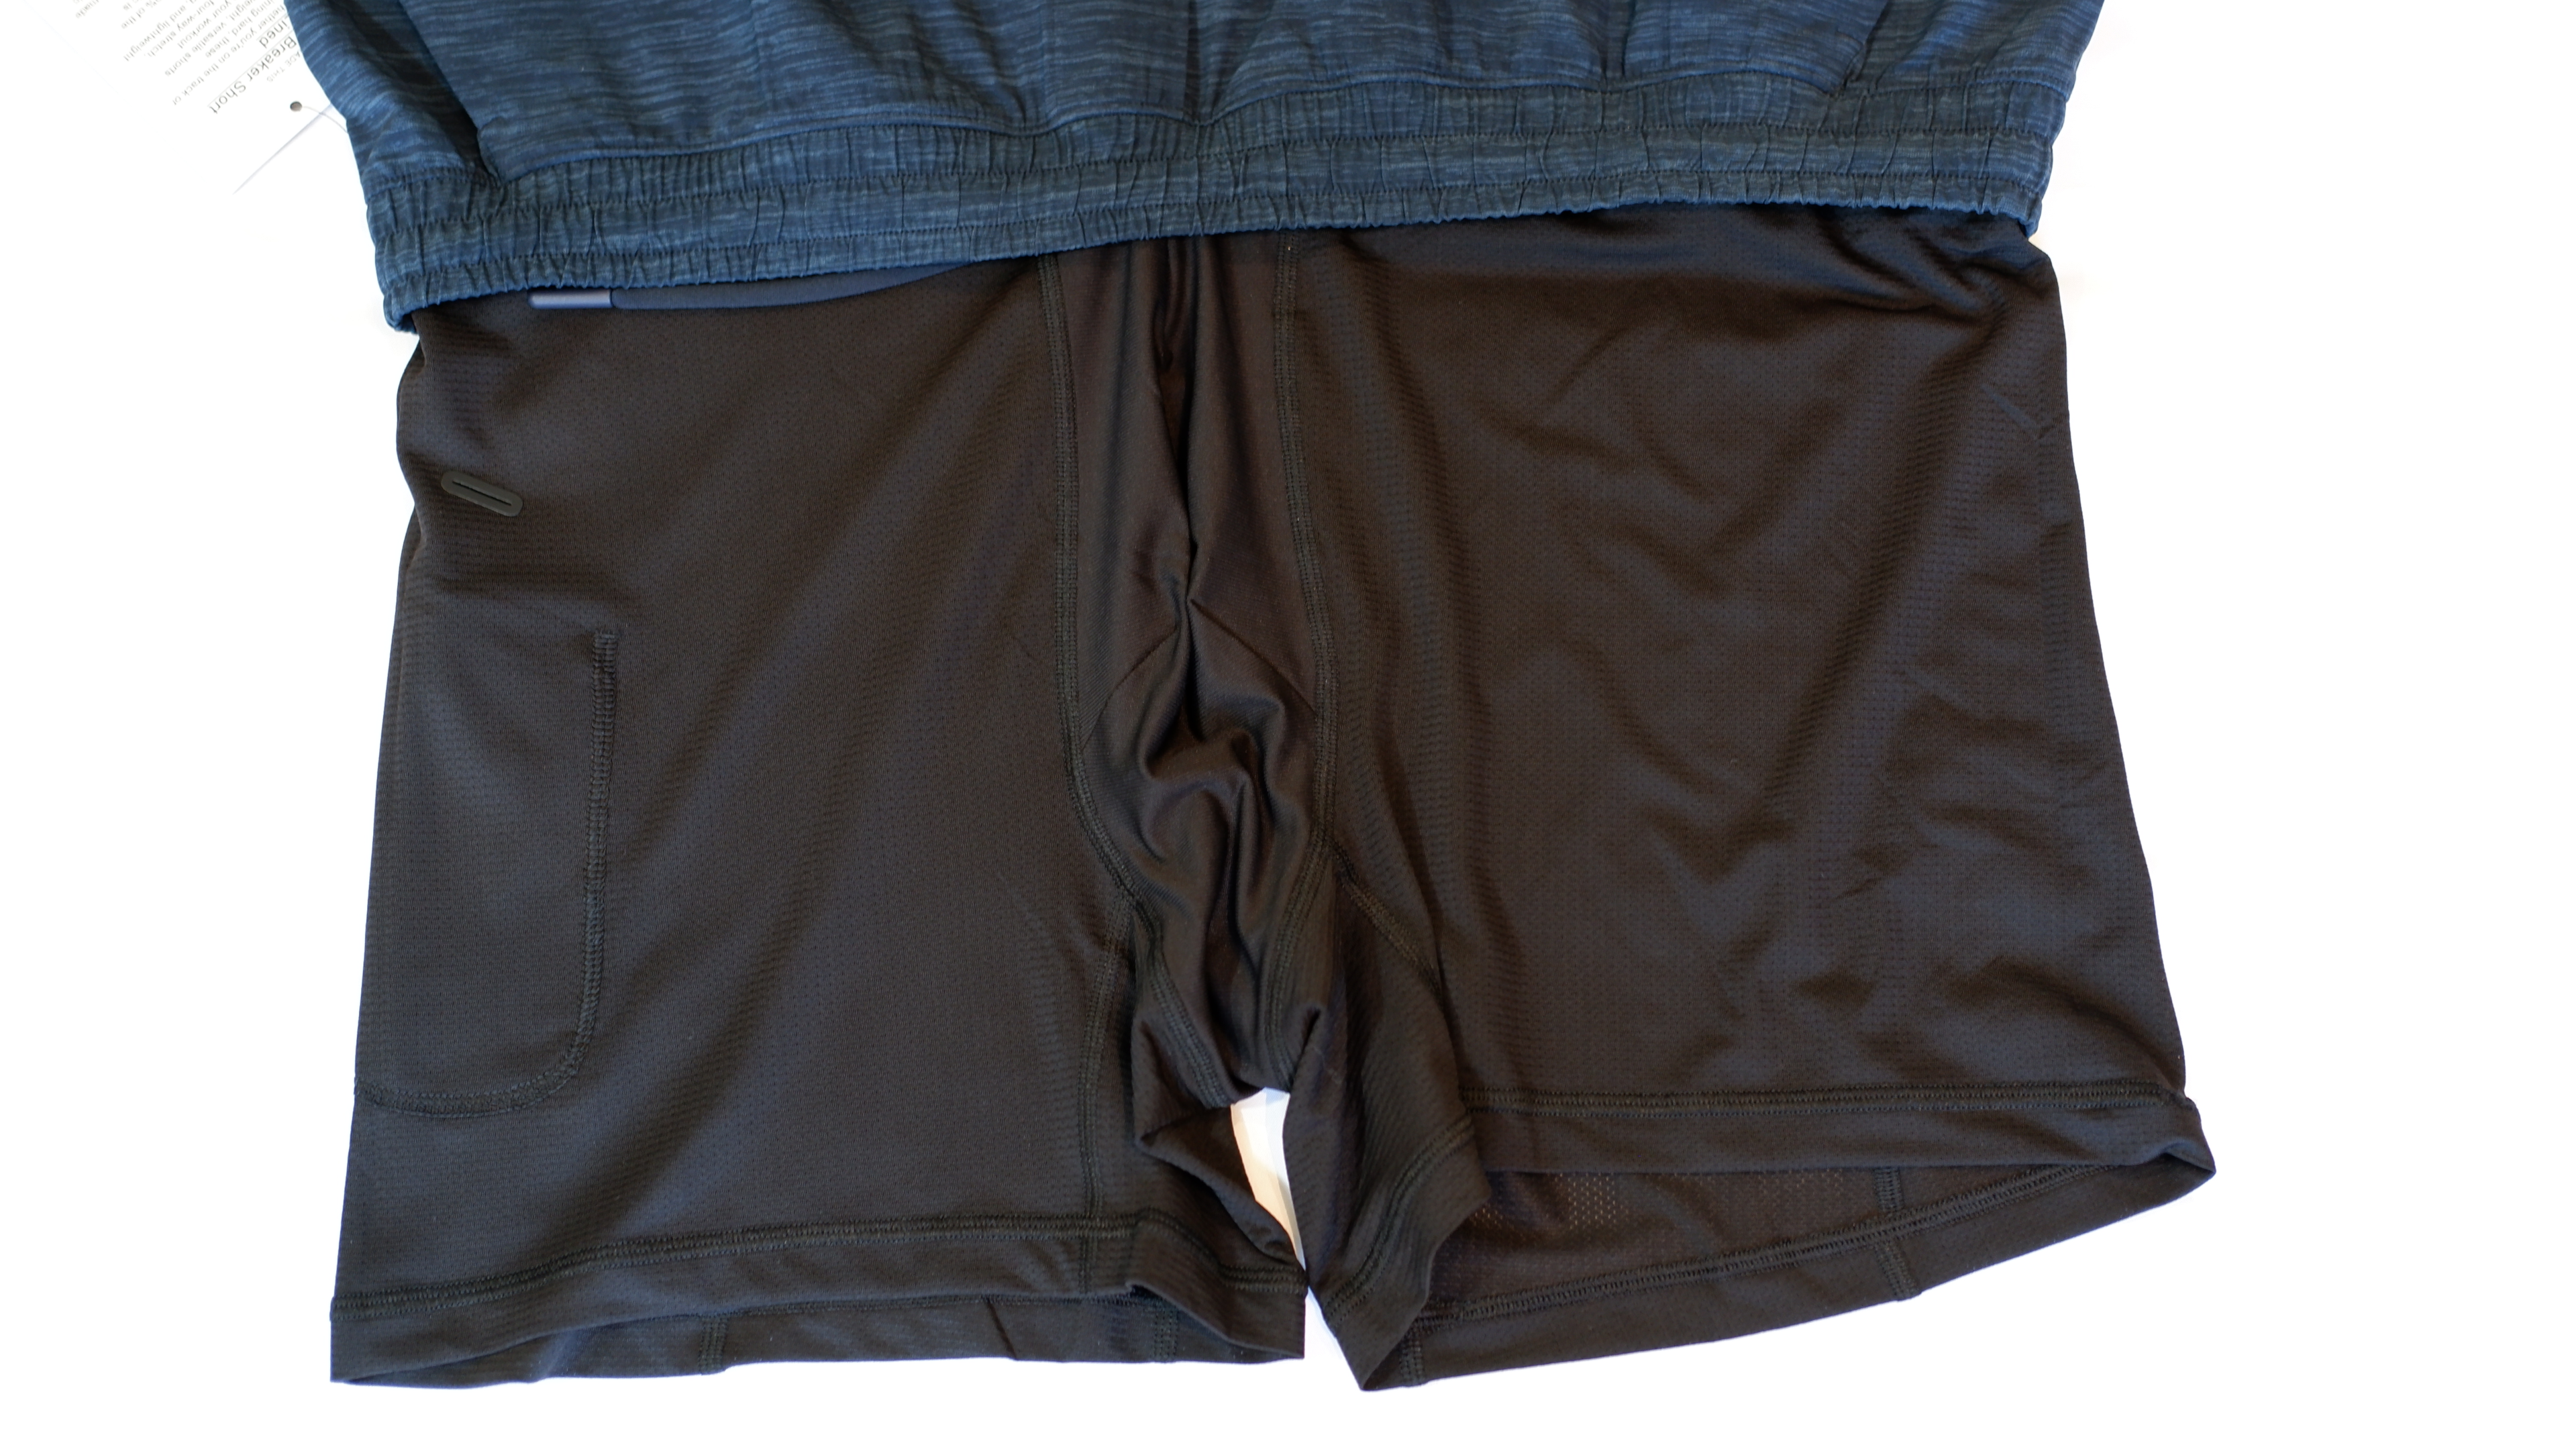 lululemon shorts review: These are going to be your new favorite shorts -  Reviewed